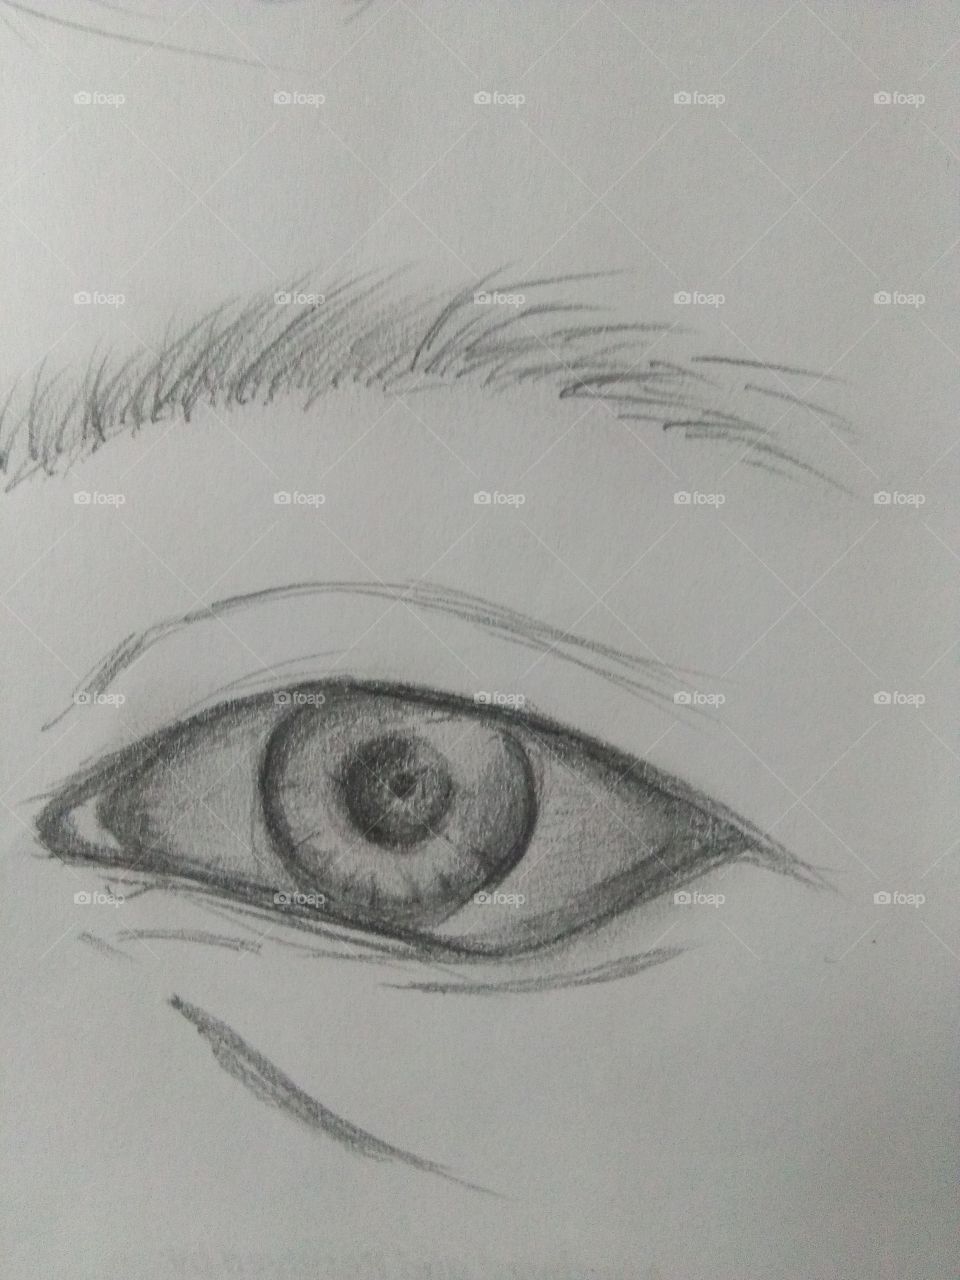 Practicing how to sketch an eye